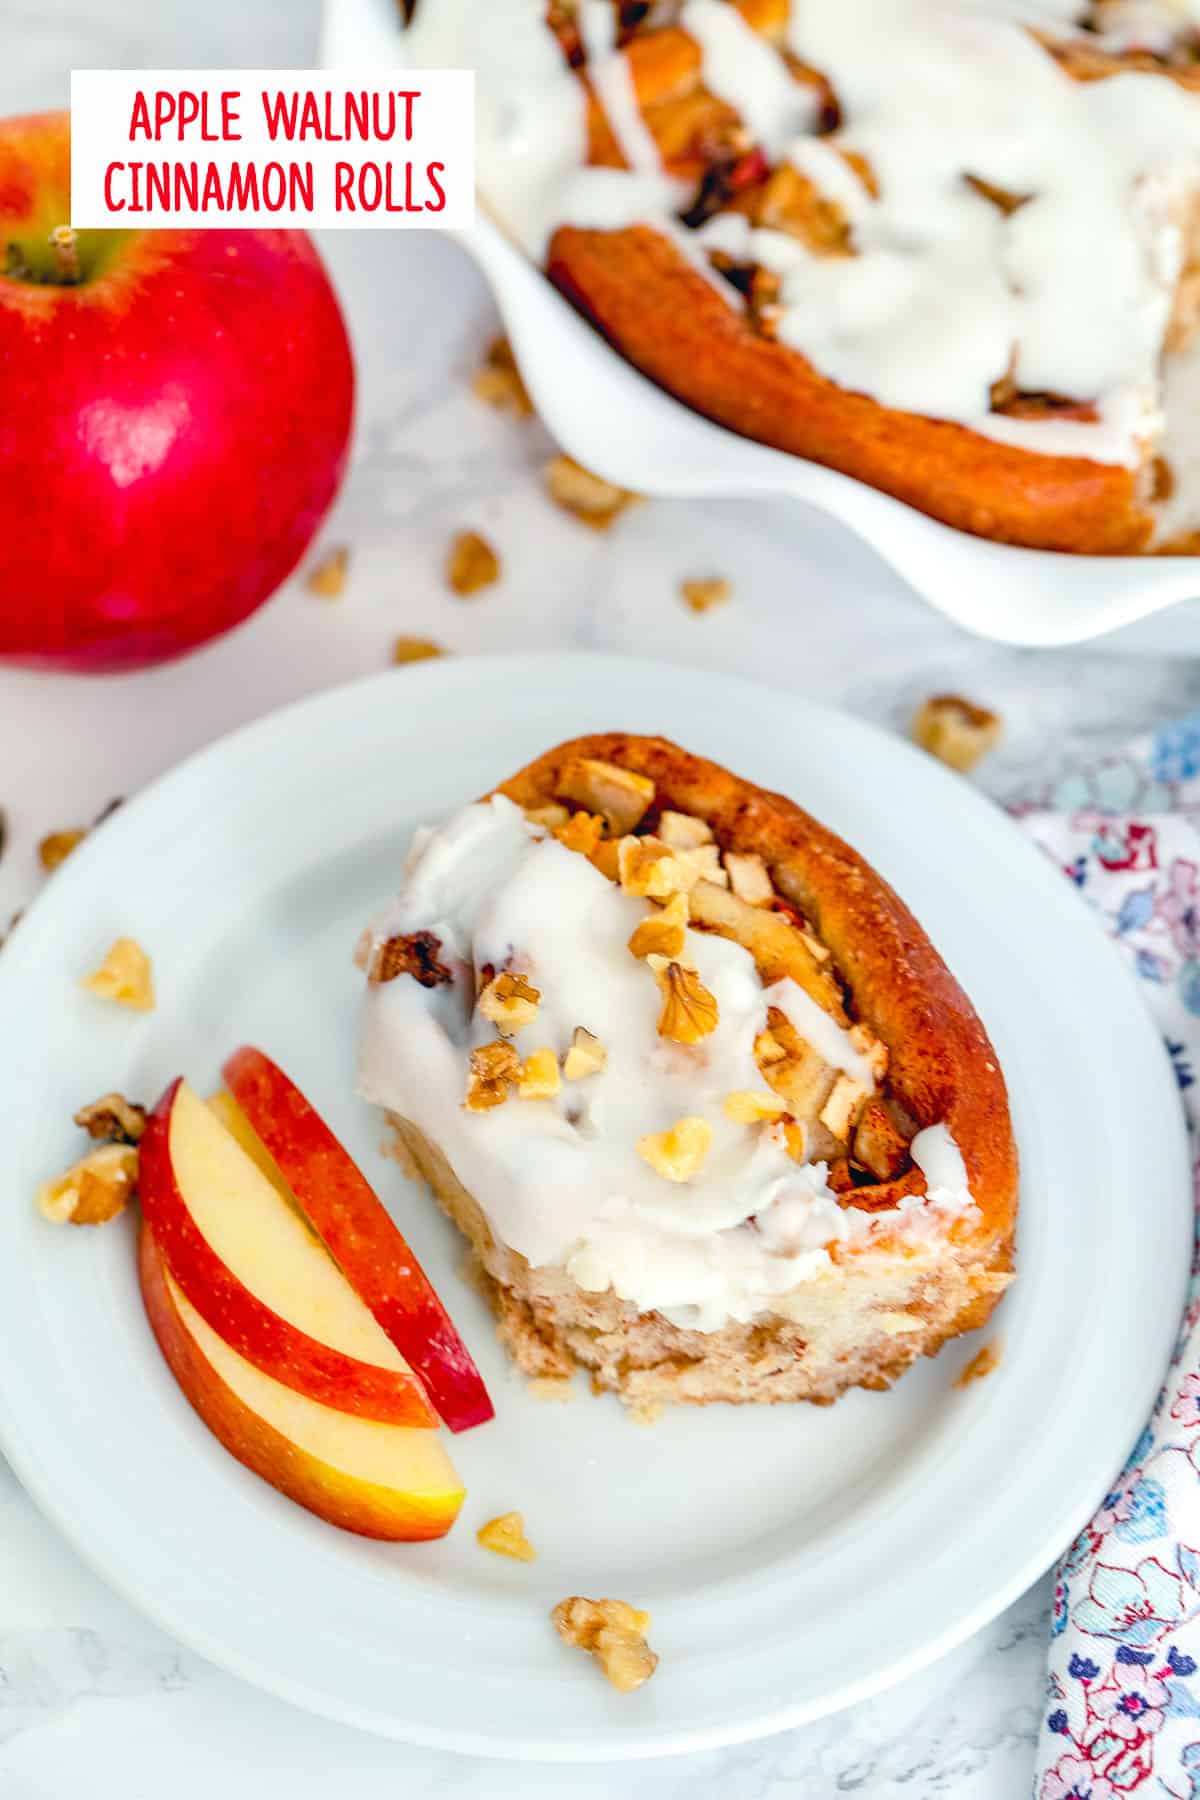 Overhead view of an apple walnut cinnamon roll on a plate with sliced apples with whole apple and dish of cinnamon rolls in the background with walnuts scattered all around and recipe title at top.